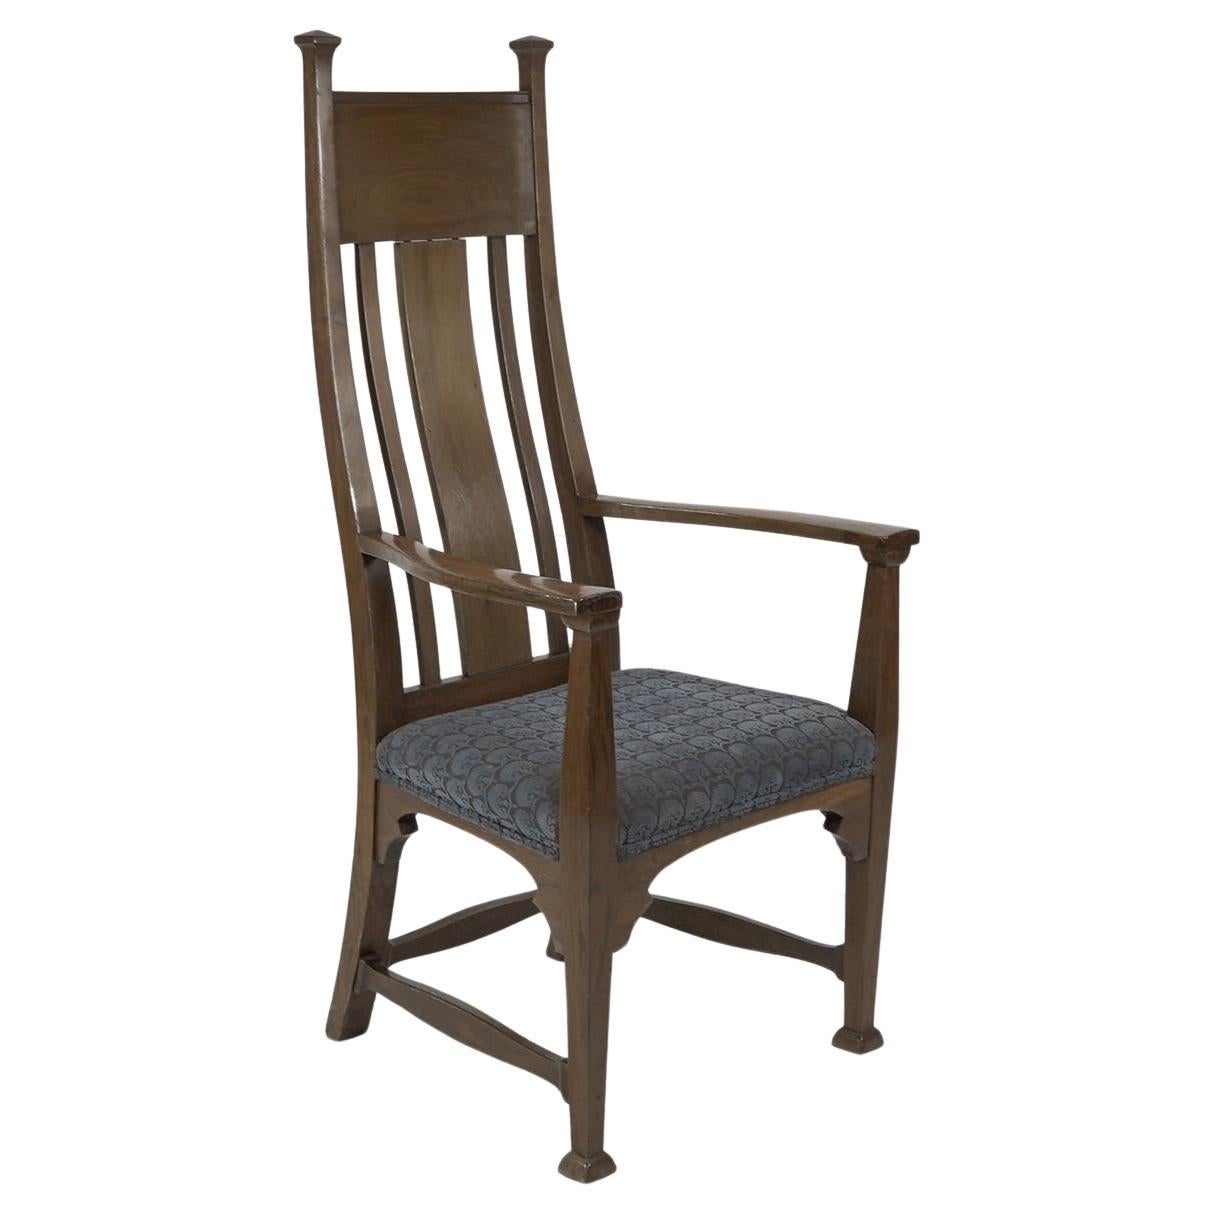 Norman & Stacey (attributed). An Arts and Crafts walnut high back armchair